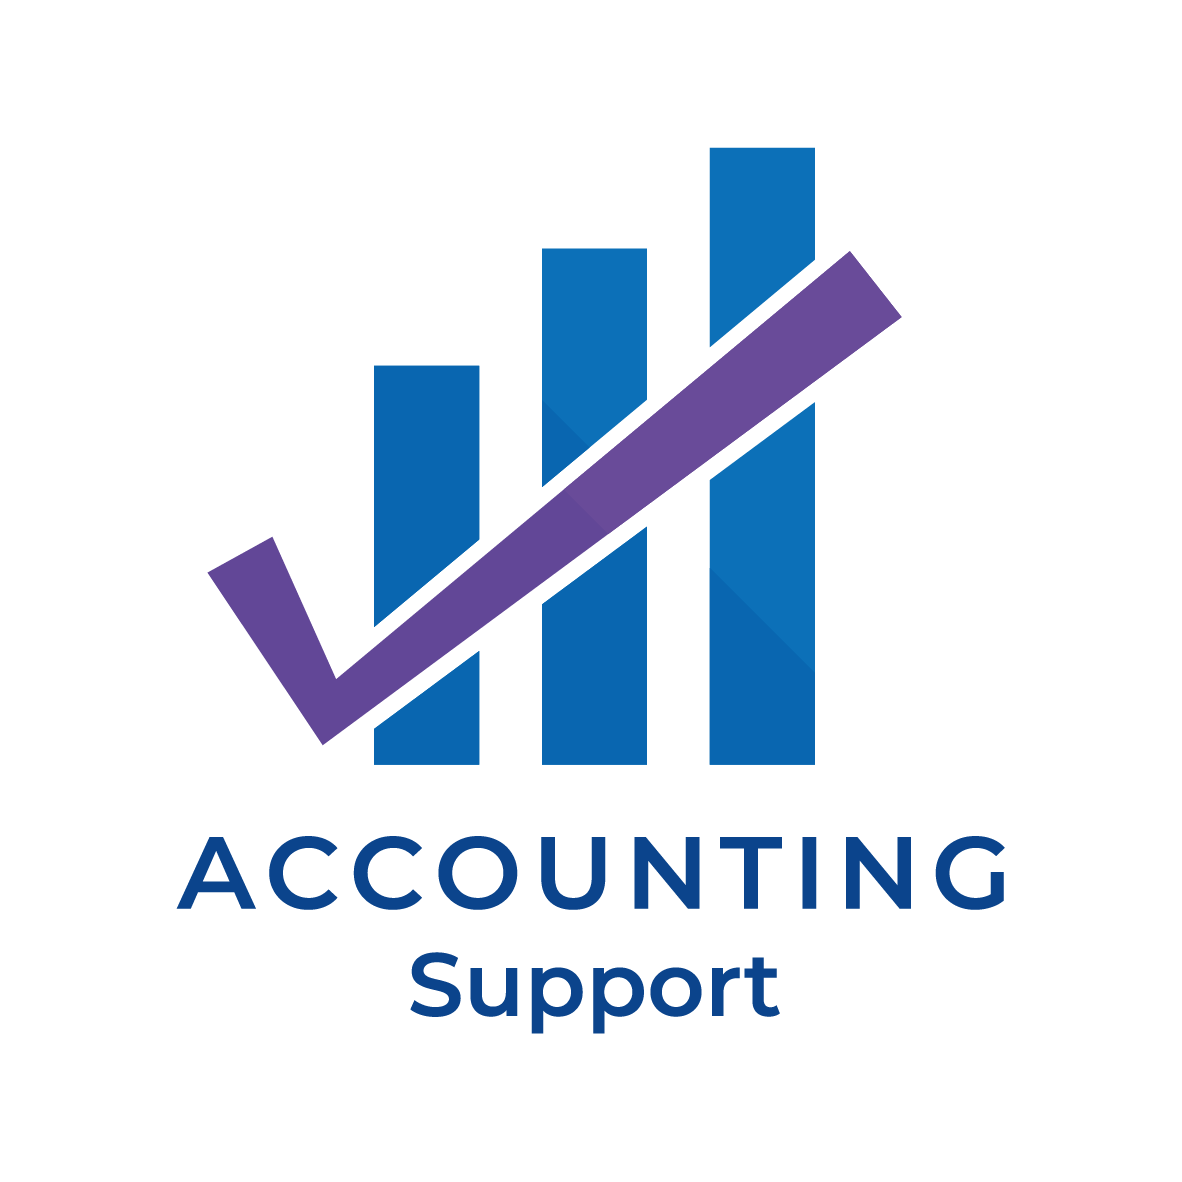 Accounting Support